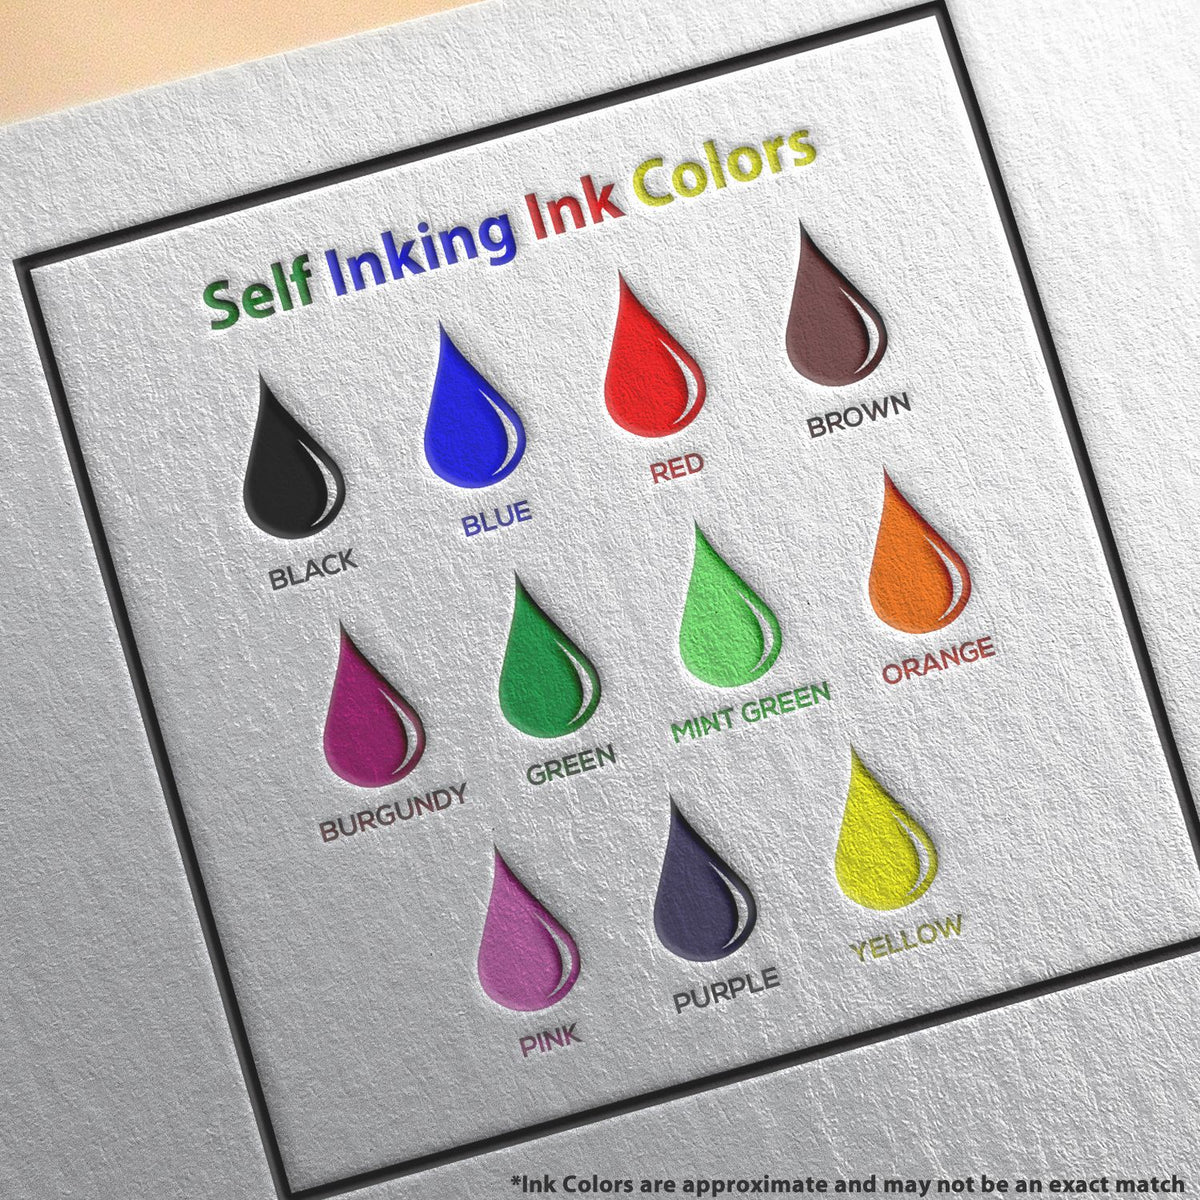 A picture showing the different ink colors or hues available for the Self-Inking Nebraska Landscape Architect Stamp product.